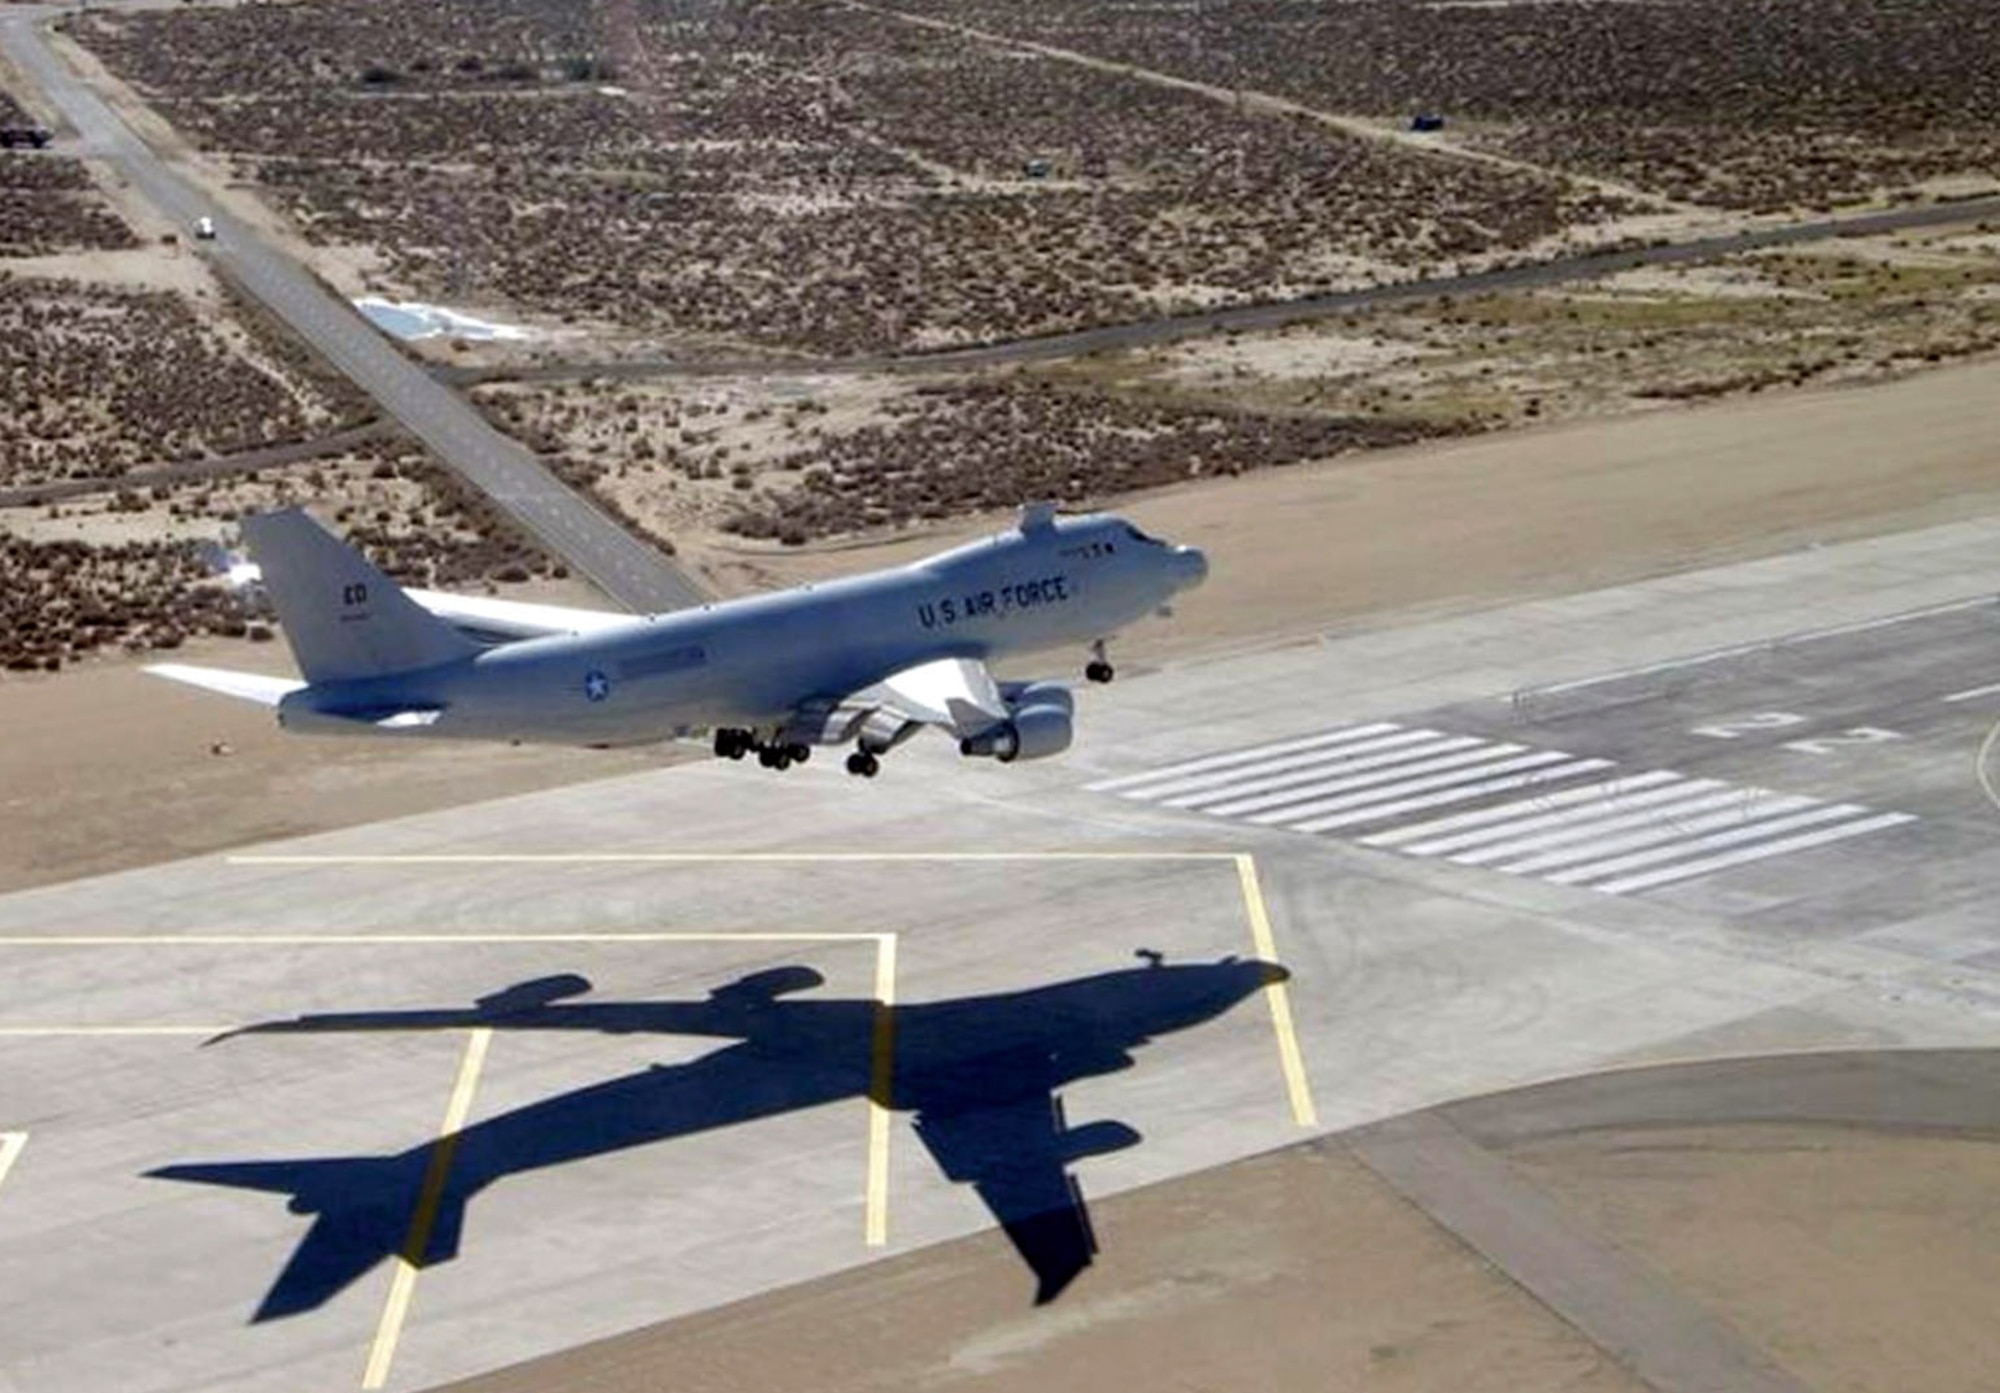 The YAL-1A, a modified Boeing 747-400F known as the Airborne Laser, lands at Edwards Air Force Base, Calif. The Airborne Laser Testbed successfully destroyed a boosting ballistic missile Feb. 11 over the Pacific Ocean. (U.S. Air Force photo)